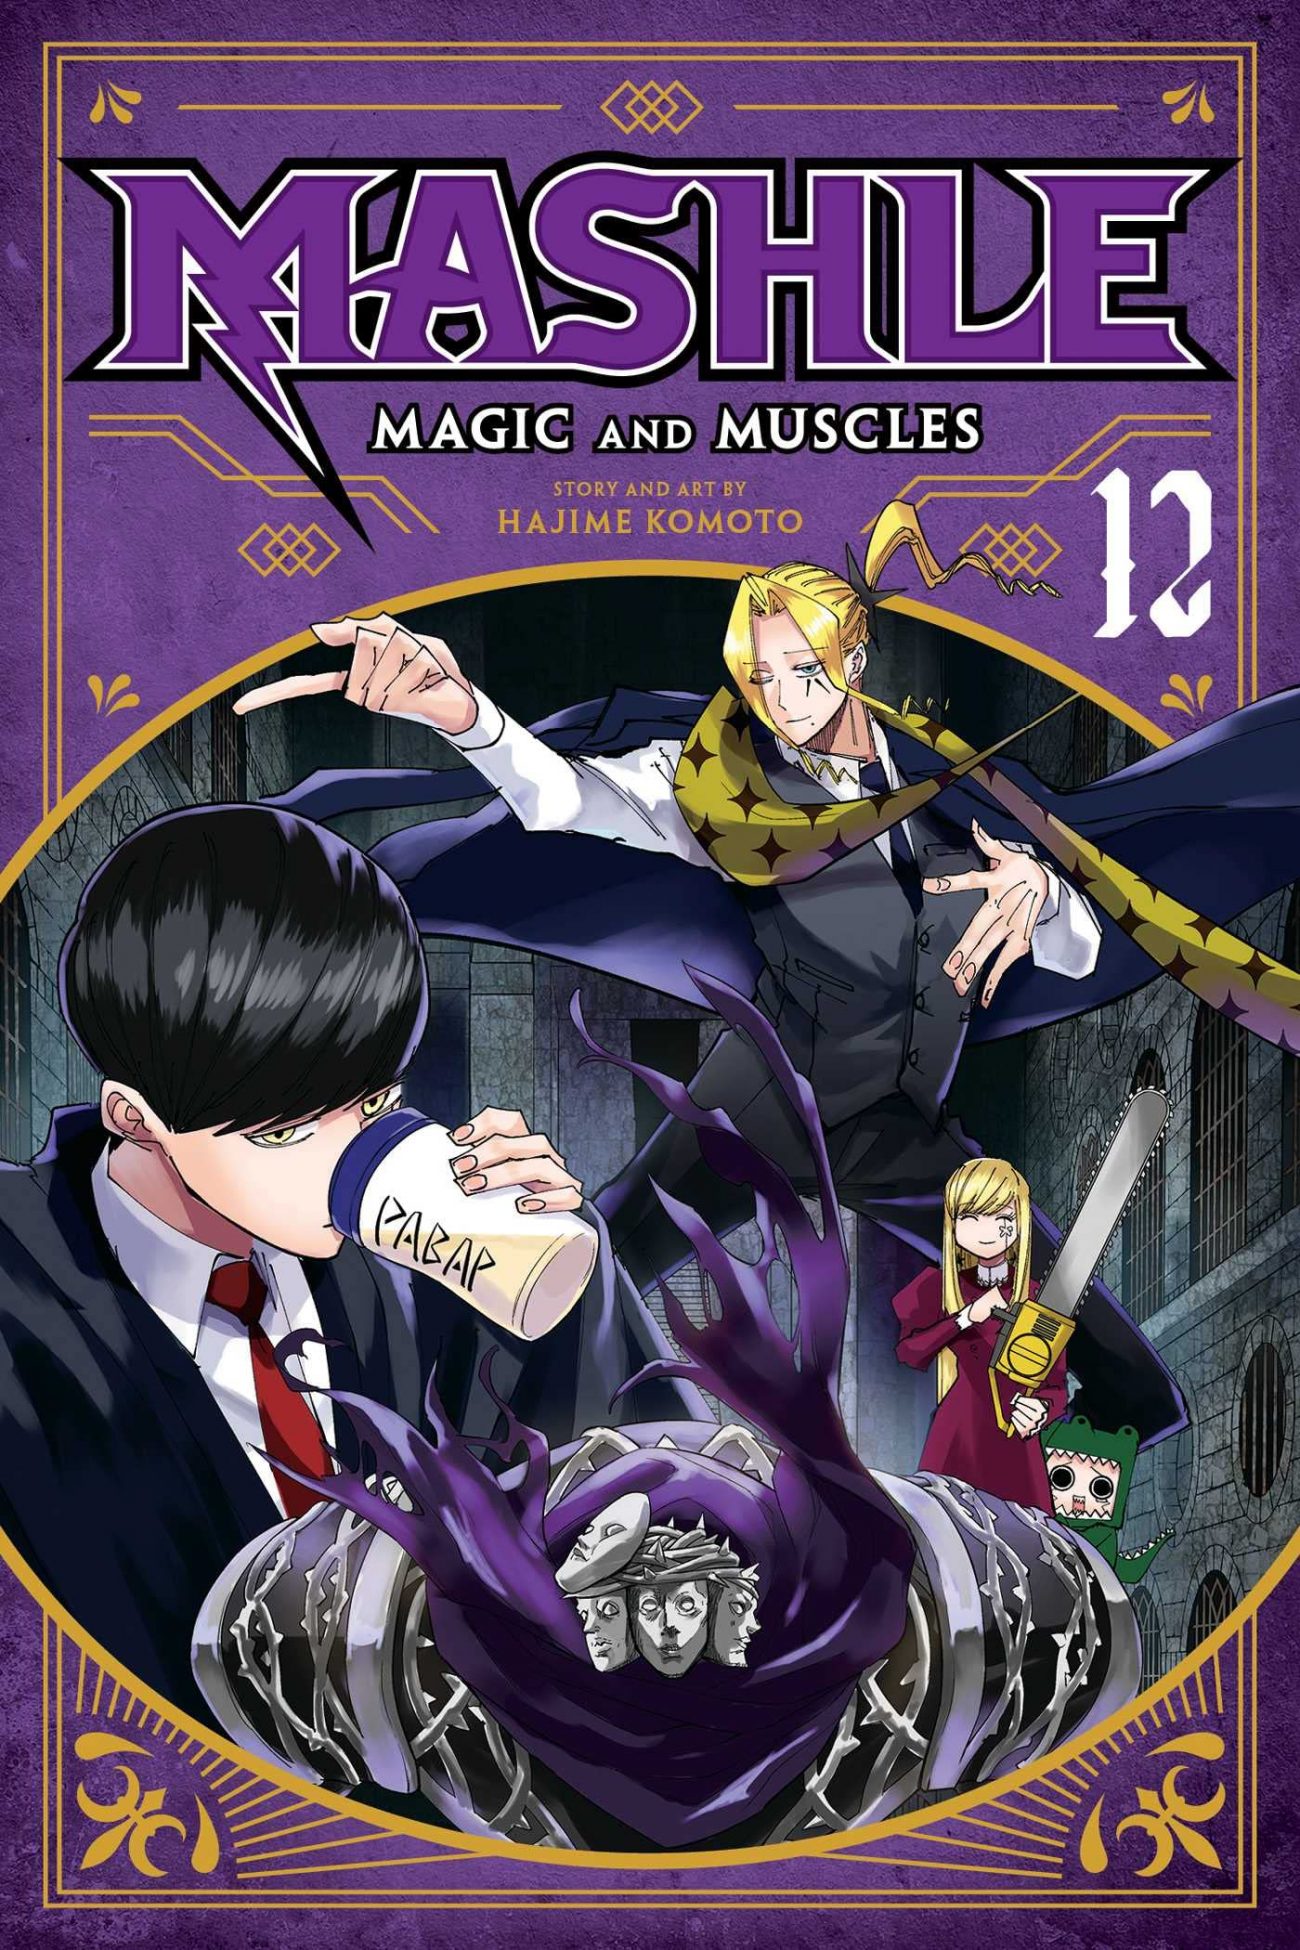 Mashle: Magic and Muscles Episode 12 Release Date & Time